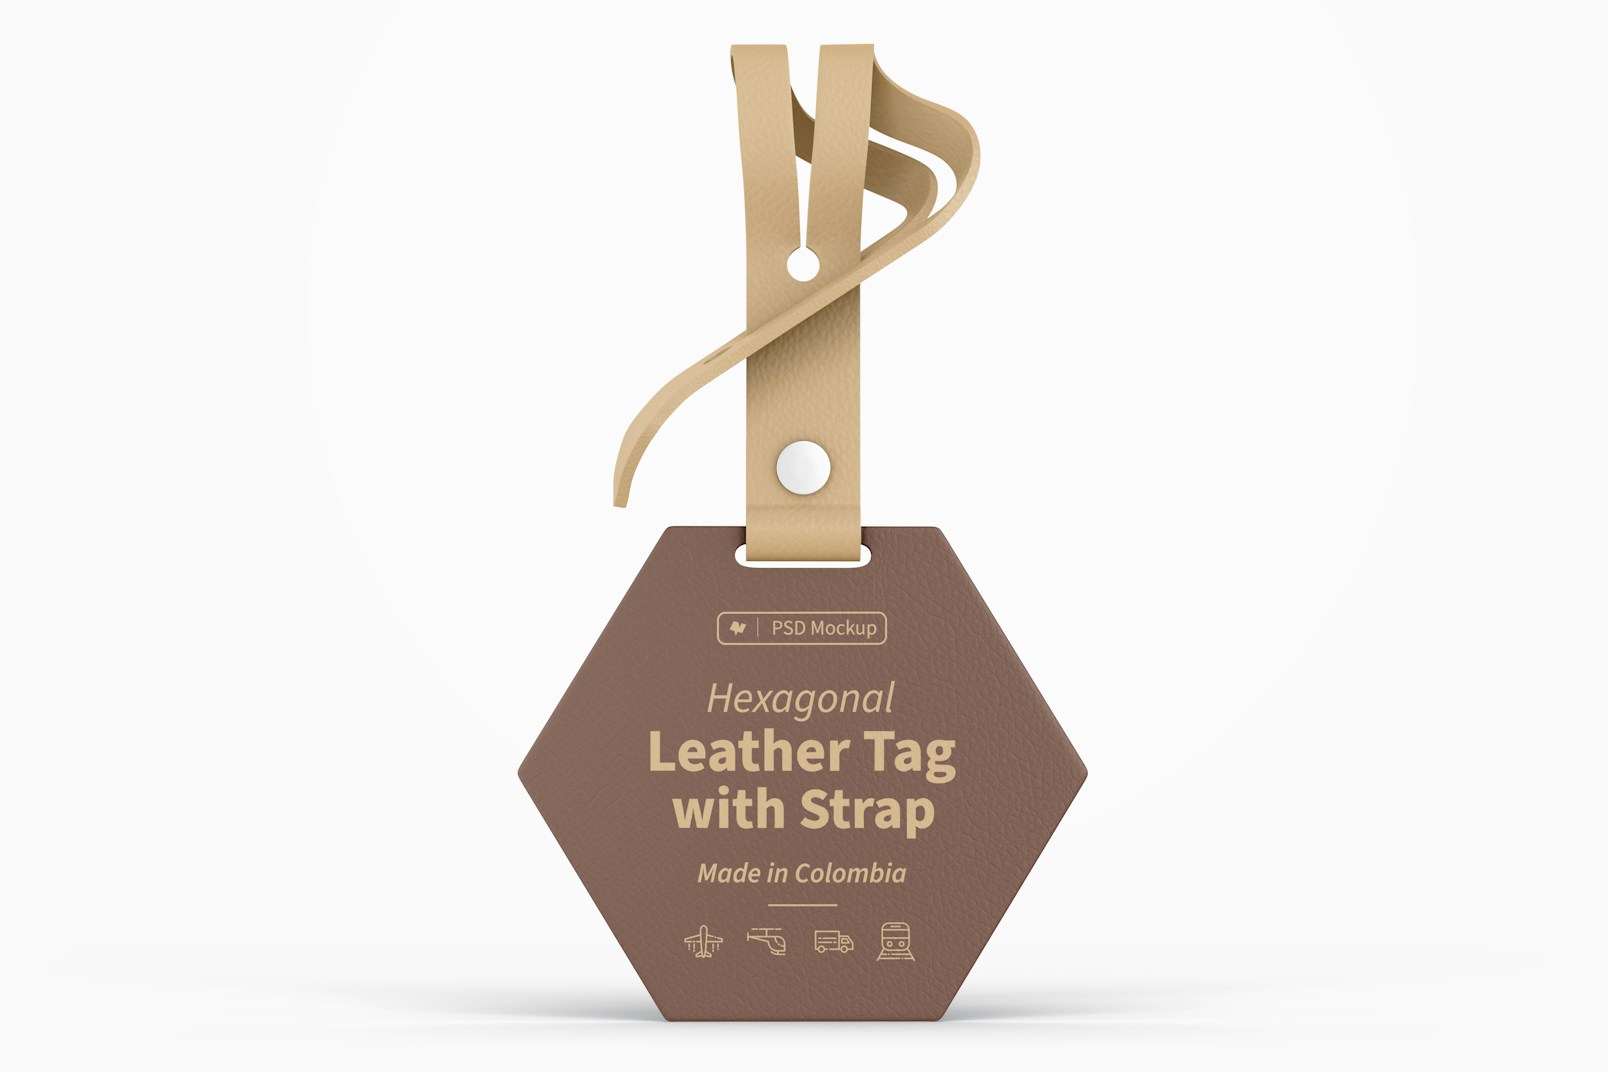 Hexagonal Leather Tag with Strap Mockup, Front View